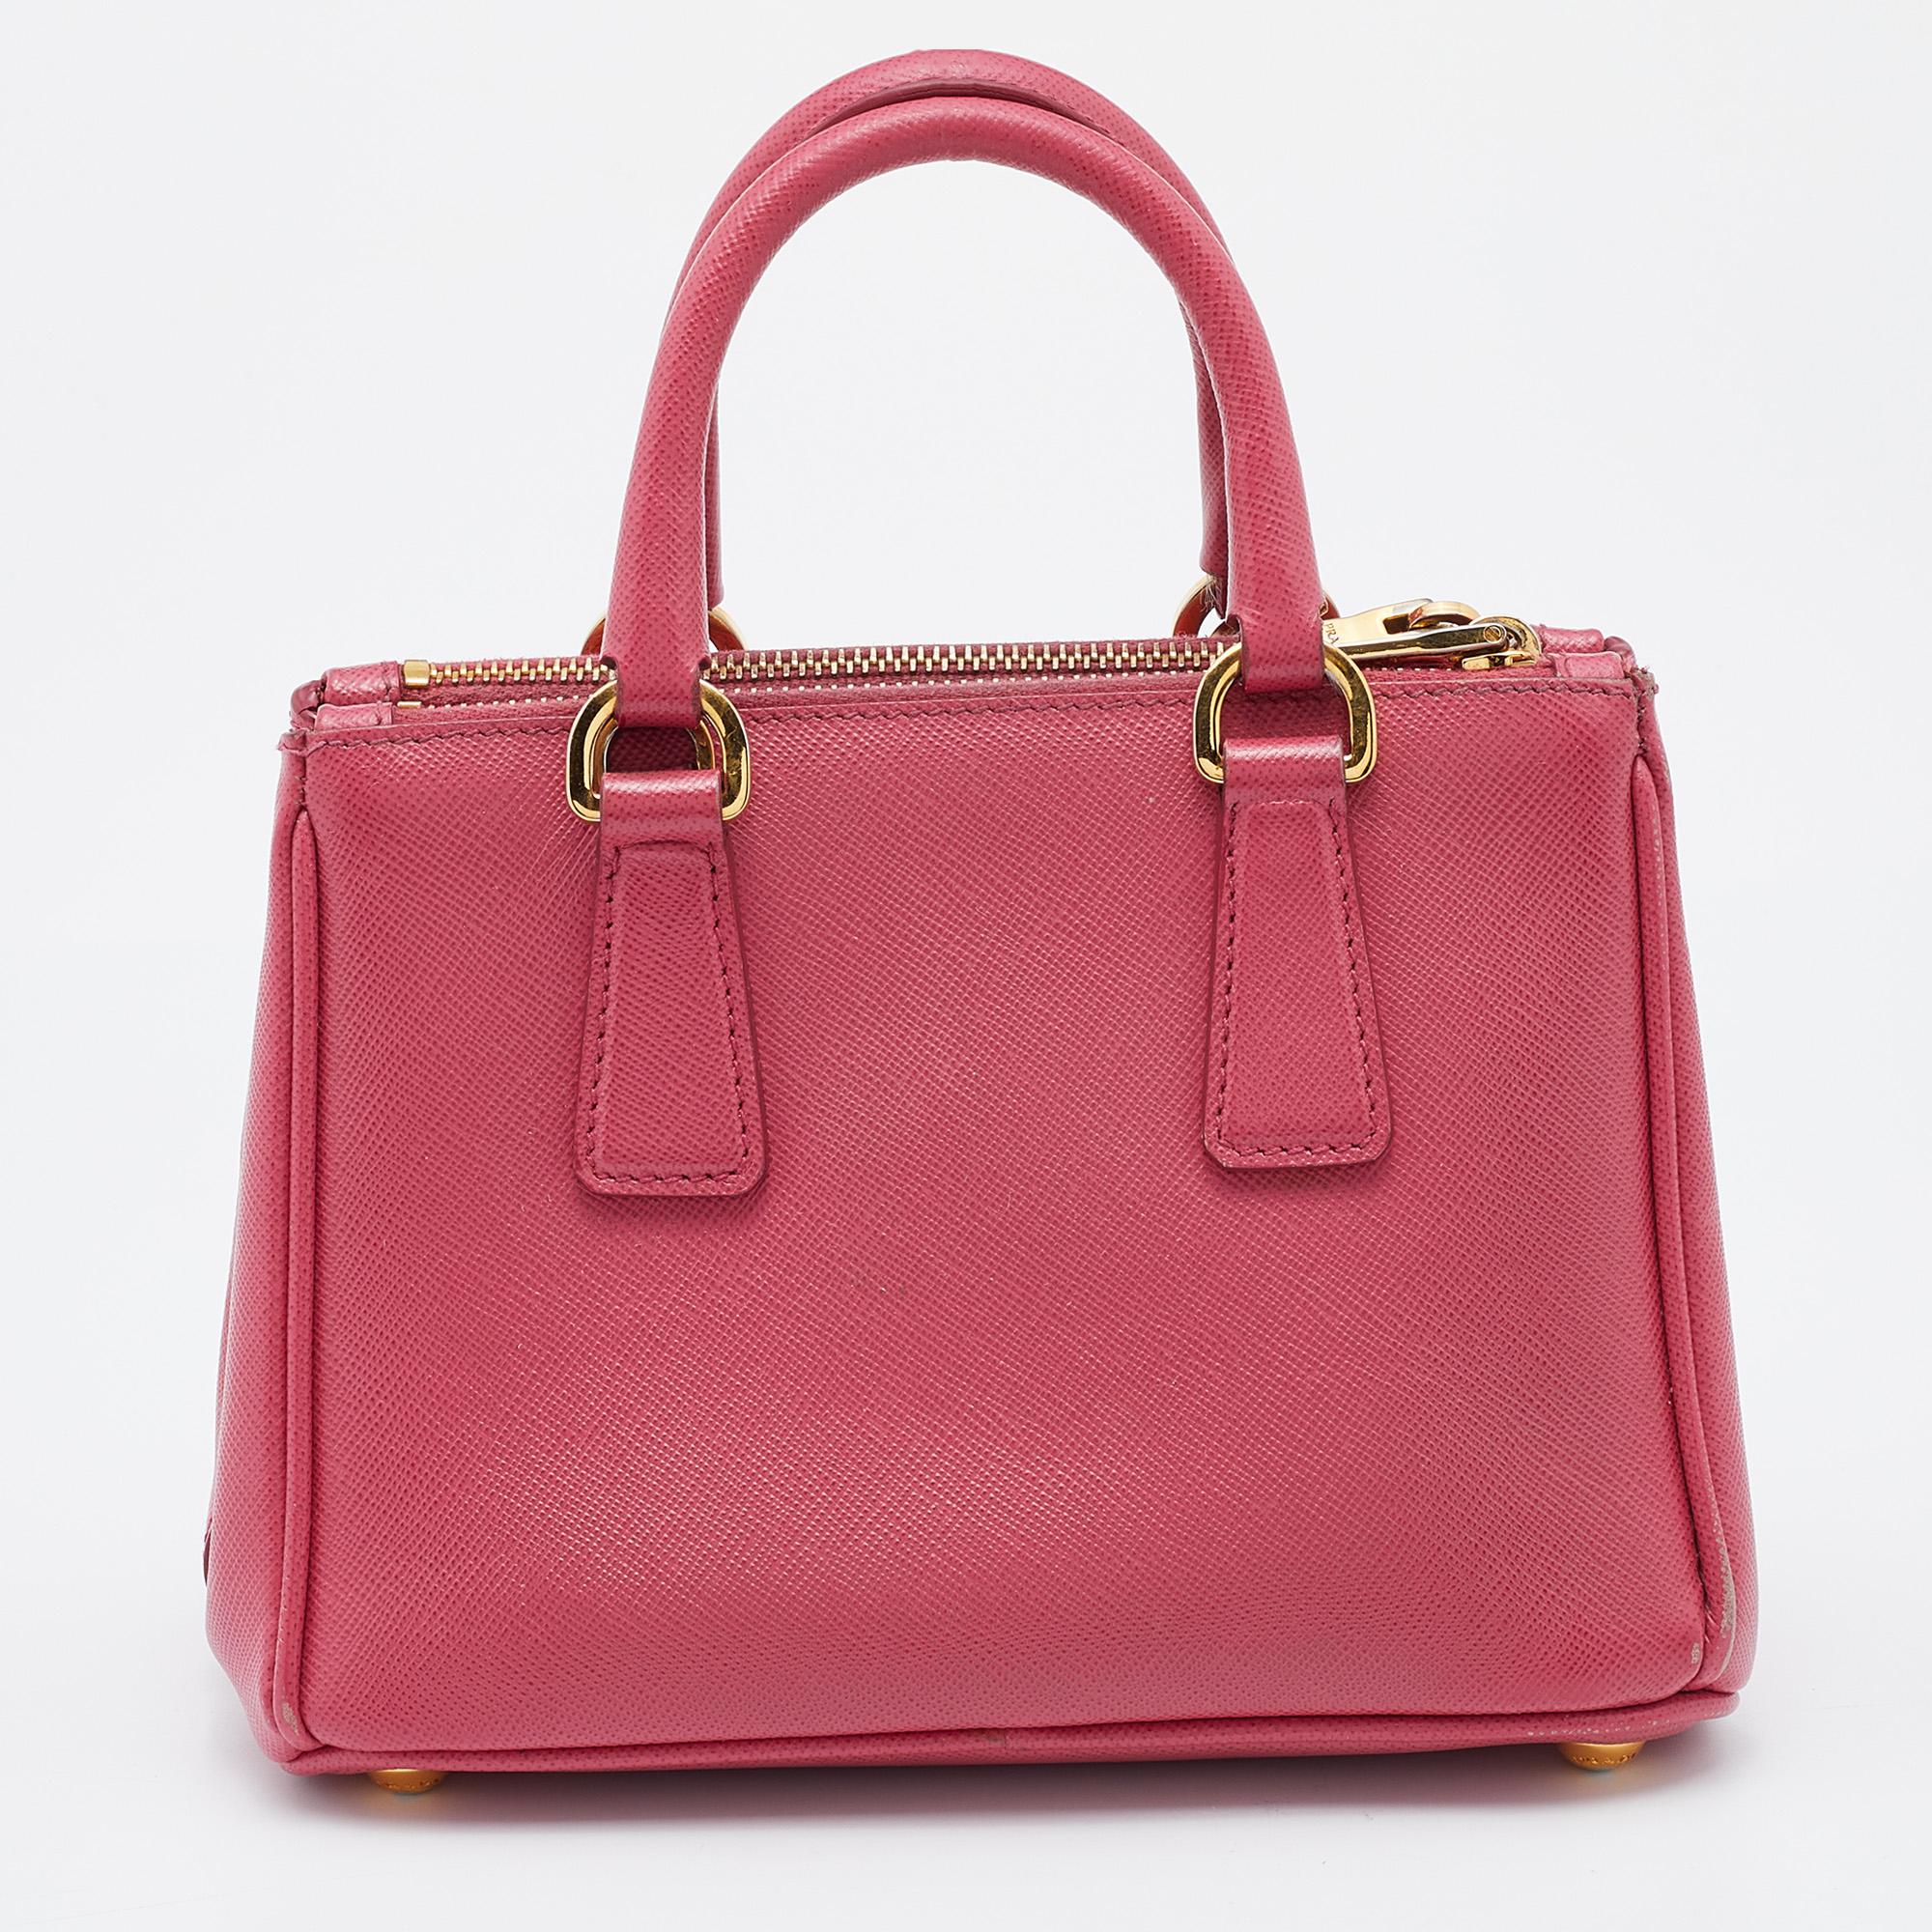 Loved for its classic appeal and functional design, Galleria is one of the most iconic and popular bags from Prada. This beauty in pink is crafted from Saffiano leather and is equipped with two top handles and the brand logo at the front. The